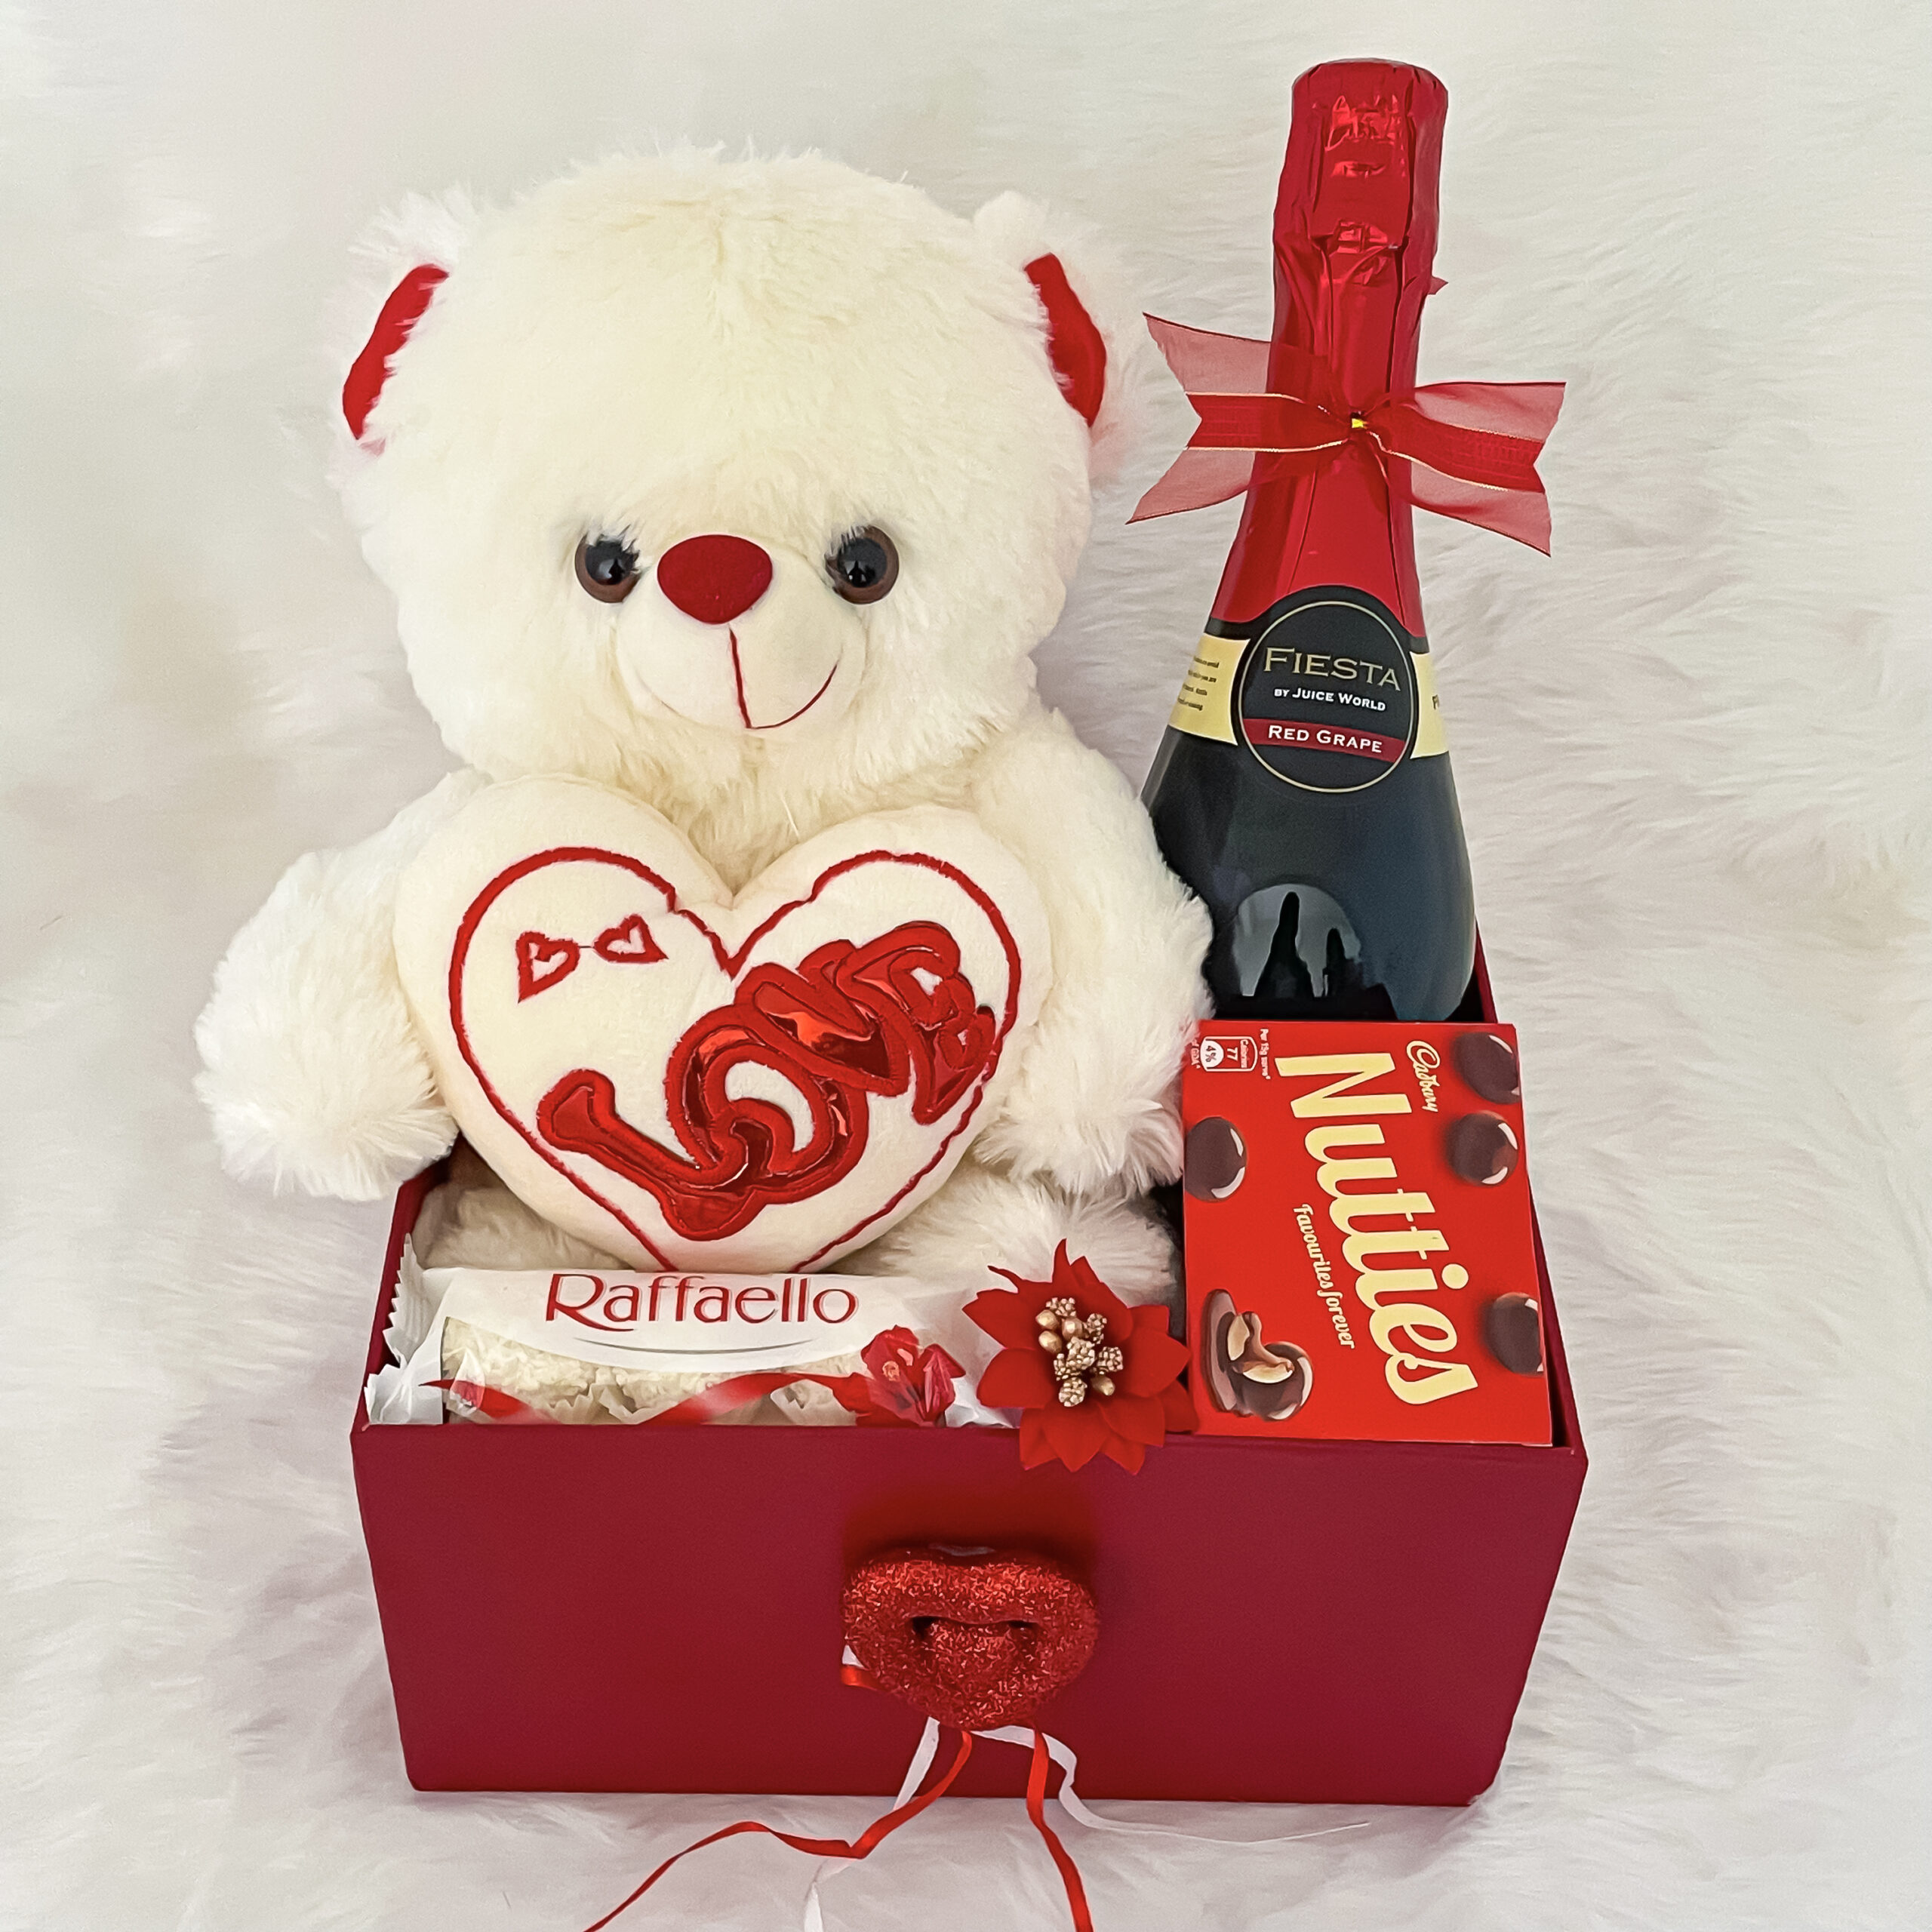 VALENTINES DAY ROMANTIC GIFTS His & Her Love Heart Cute Bears Valentine Gift UK 